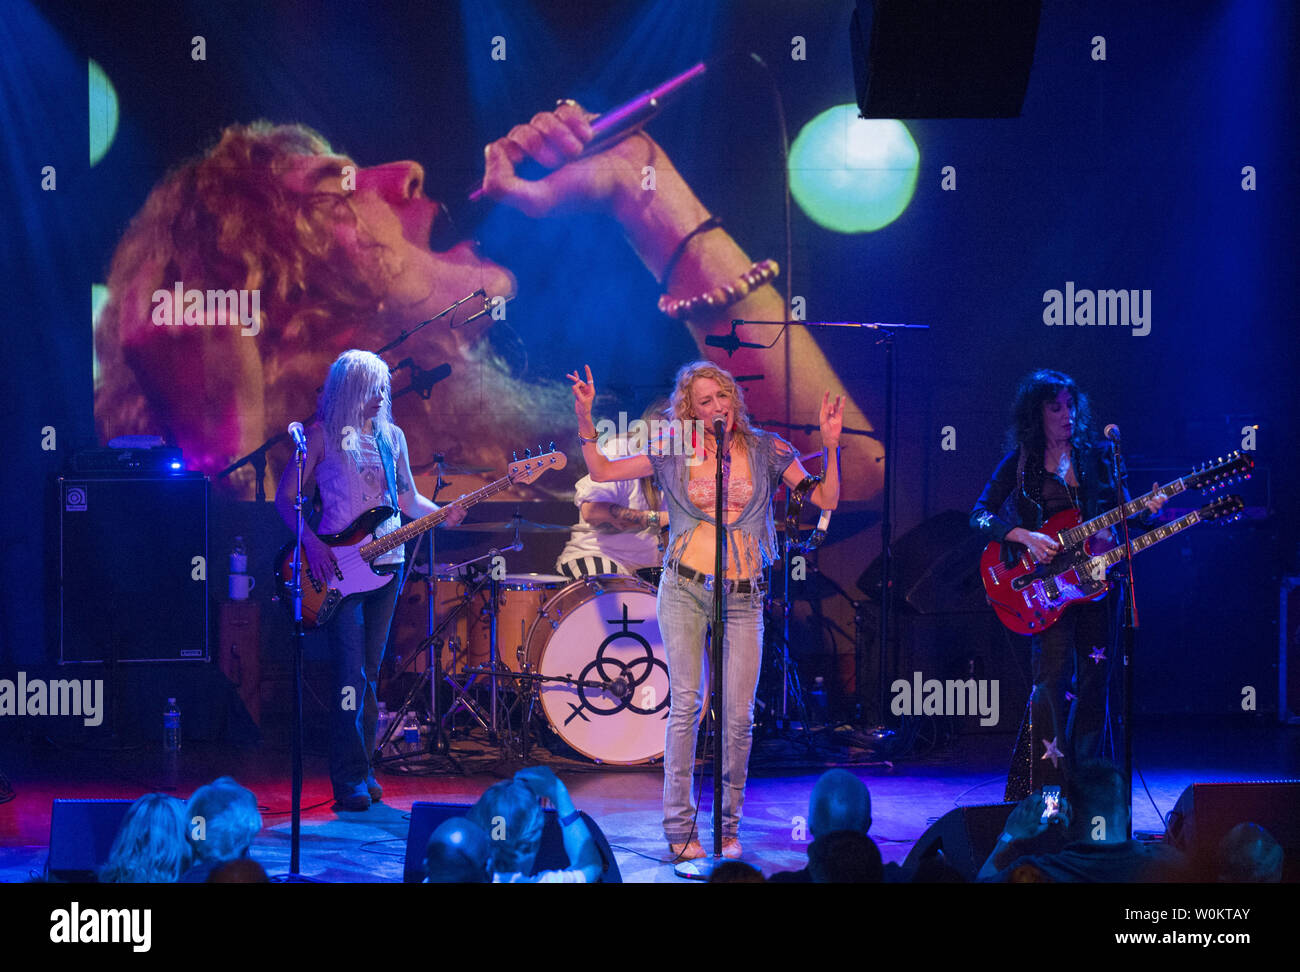 With a Led Zeppelin movie in the background, Lez Zeppelin belts out a  number at The Hamilton Live venue in downtown Washington, DC on June 7,  2015. The all-girl band played the